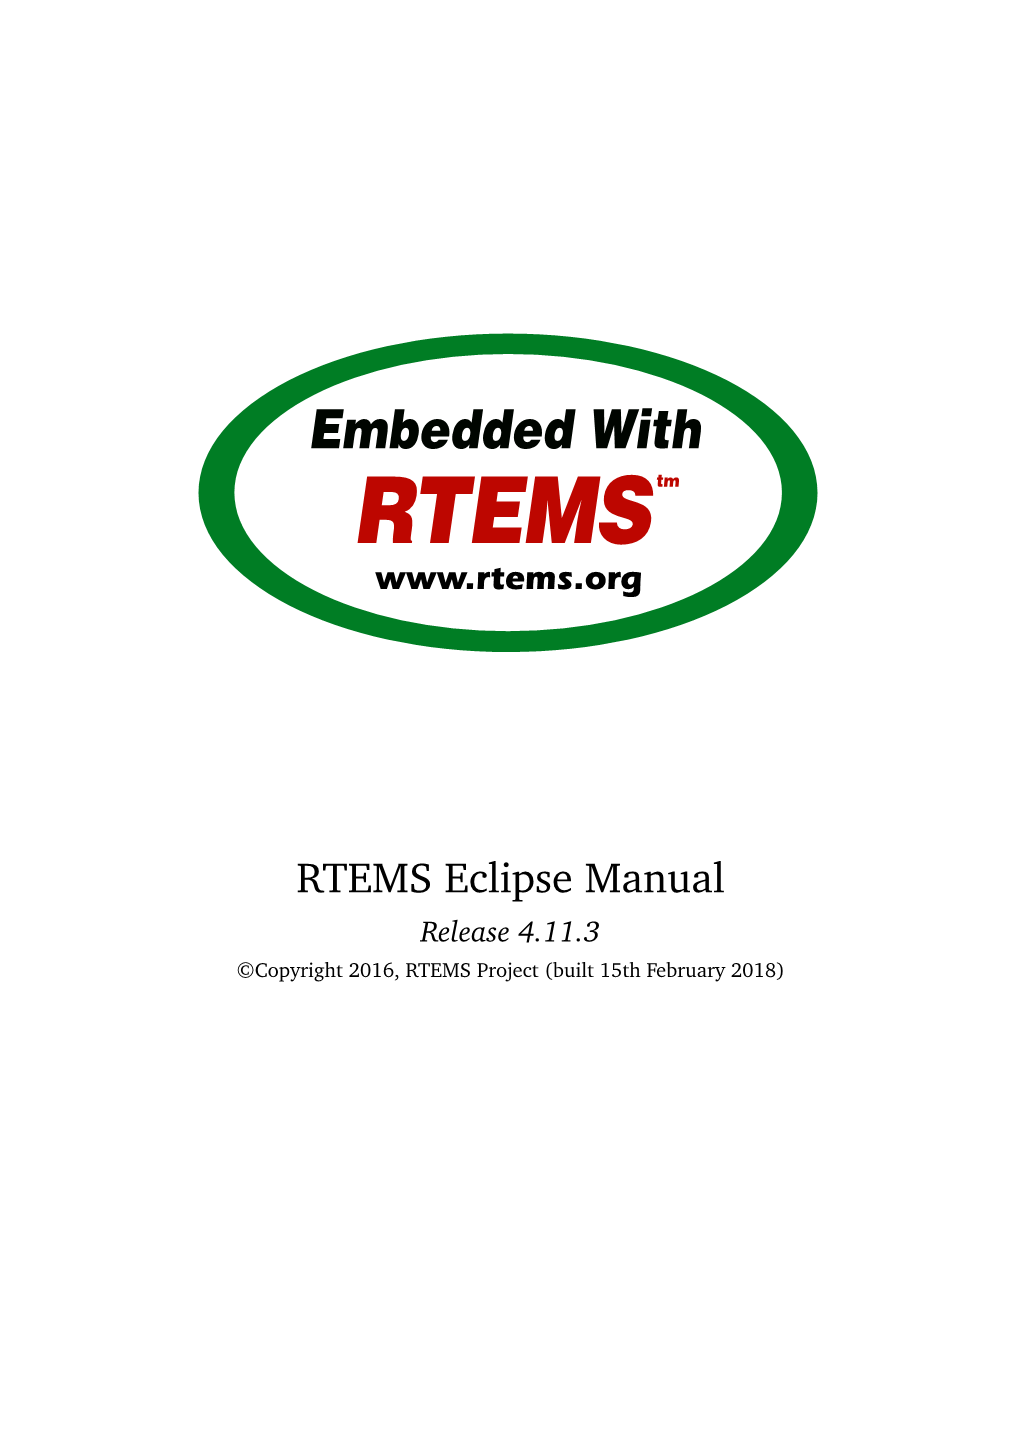 RTEMS Eclipse Manual Release 4.11.3 ©Copyright 2016, RTEMS Project (Built 15Th February 2018)